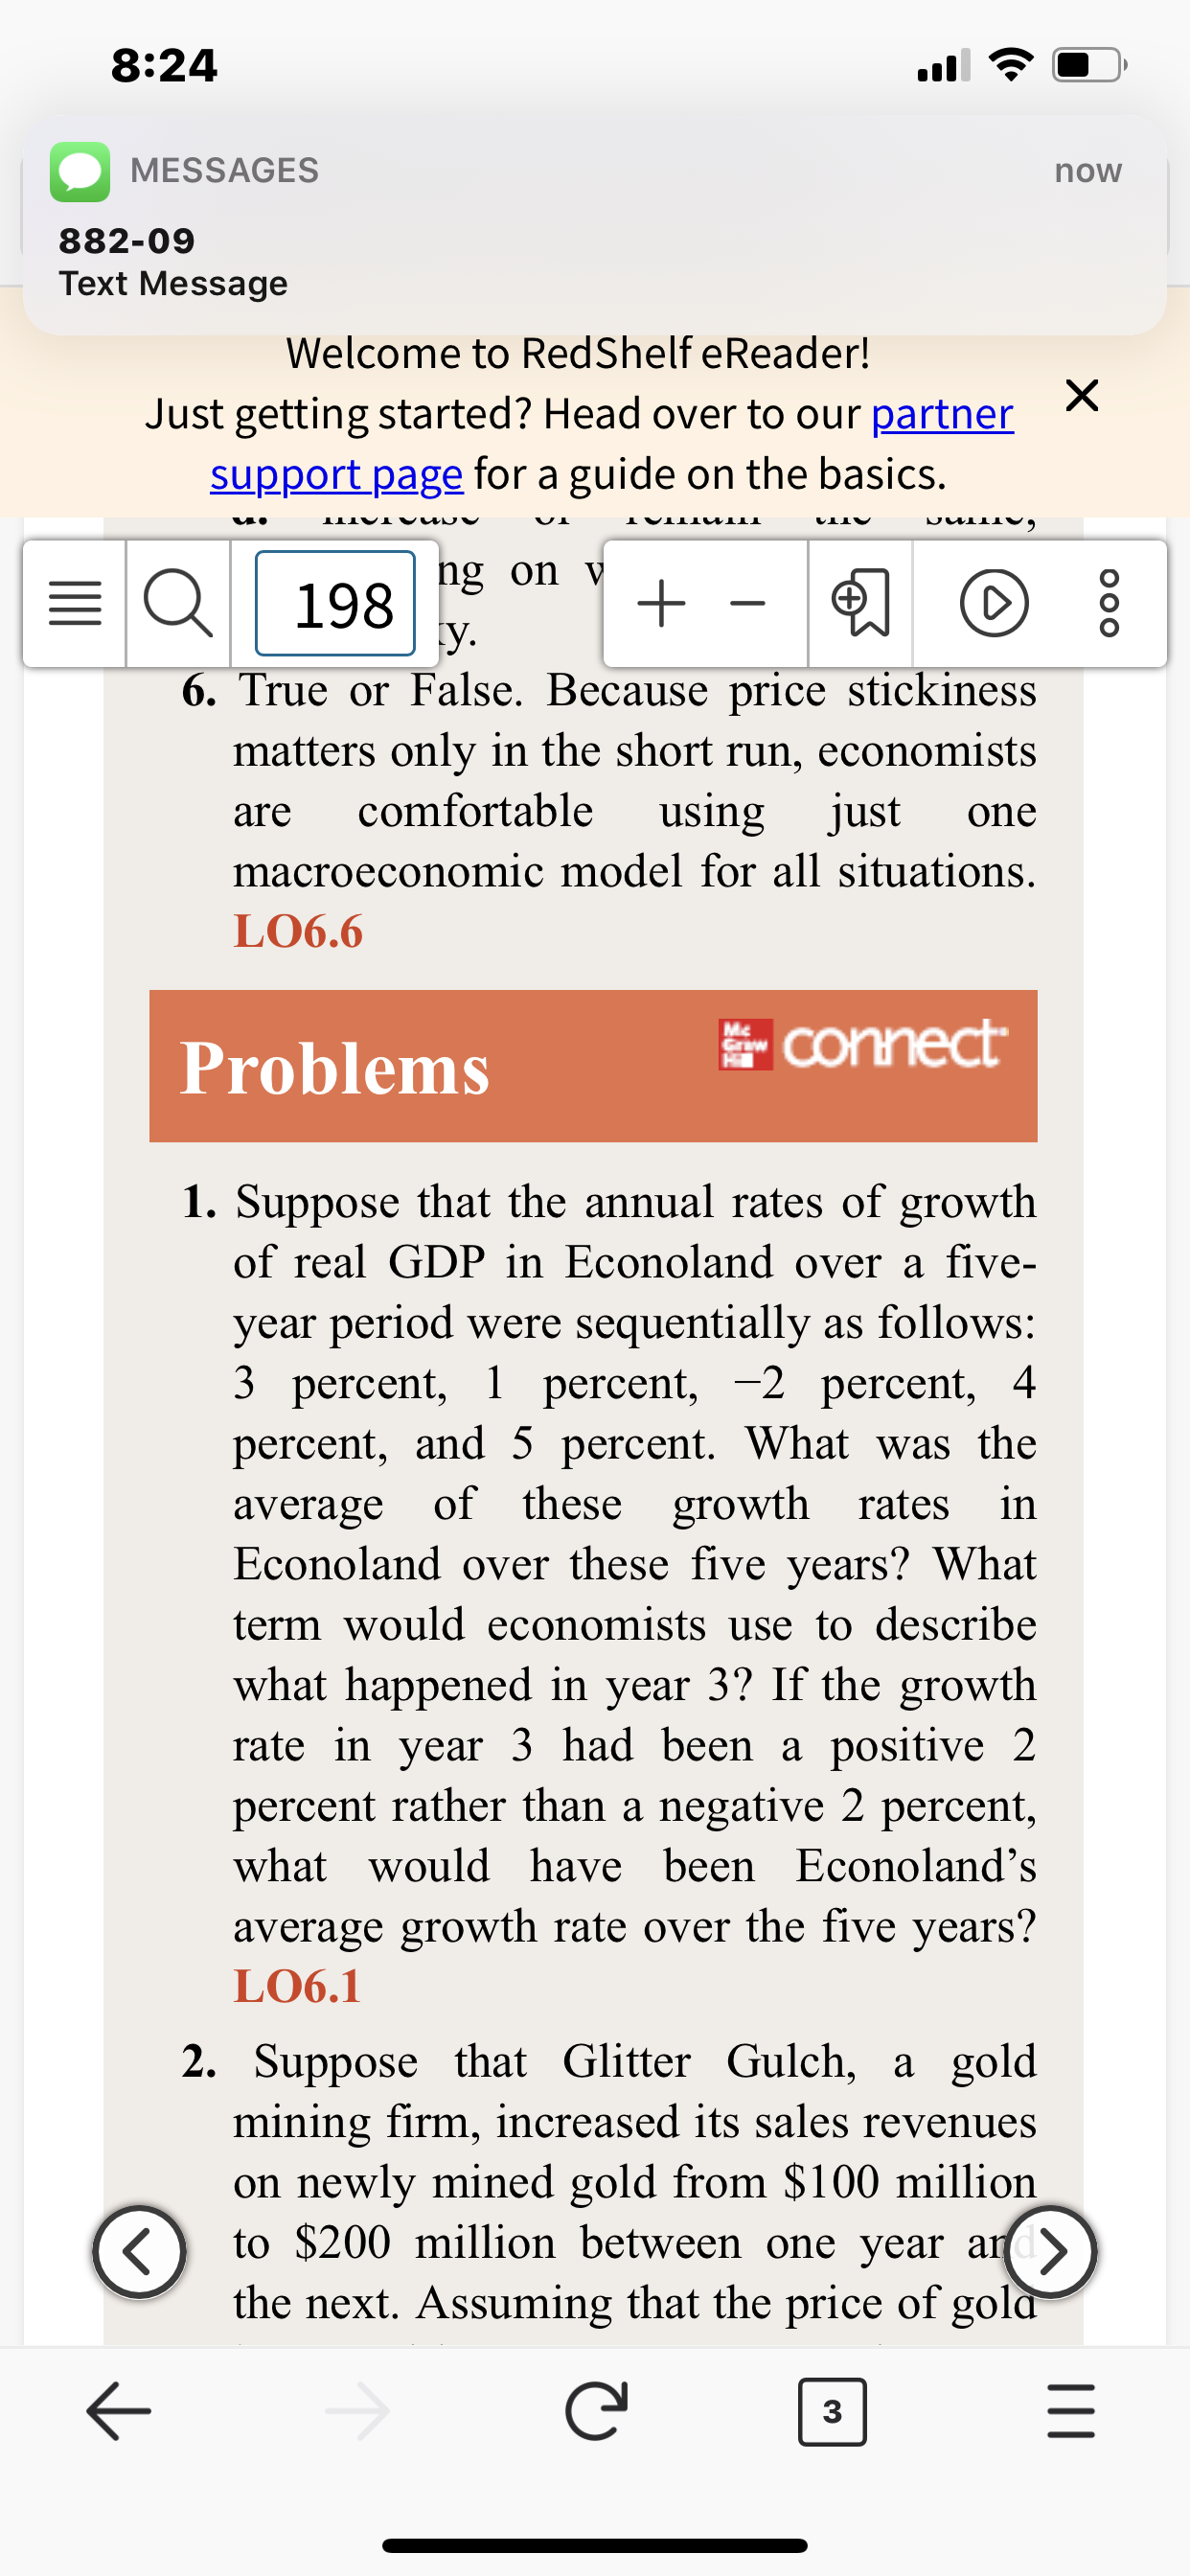 1. Suppose that the annual rates of growth
of real GDP in Econoland over a five-
year period were sequentially as follows:
3 percent, 1 percent, -2 percent, 4
percent, and 5 percent. What was the
average of these growth rates in
Econoland over these five years? What
term would economists use to describe
what happened in year 3? If the growth
rate in year 3 had been a positive 2
percent rather than a negative 2 percent,
what would have been Econoland's
average growth rate over the five years?
